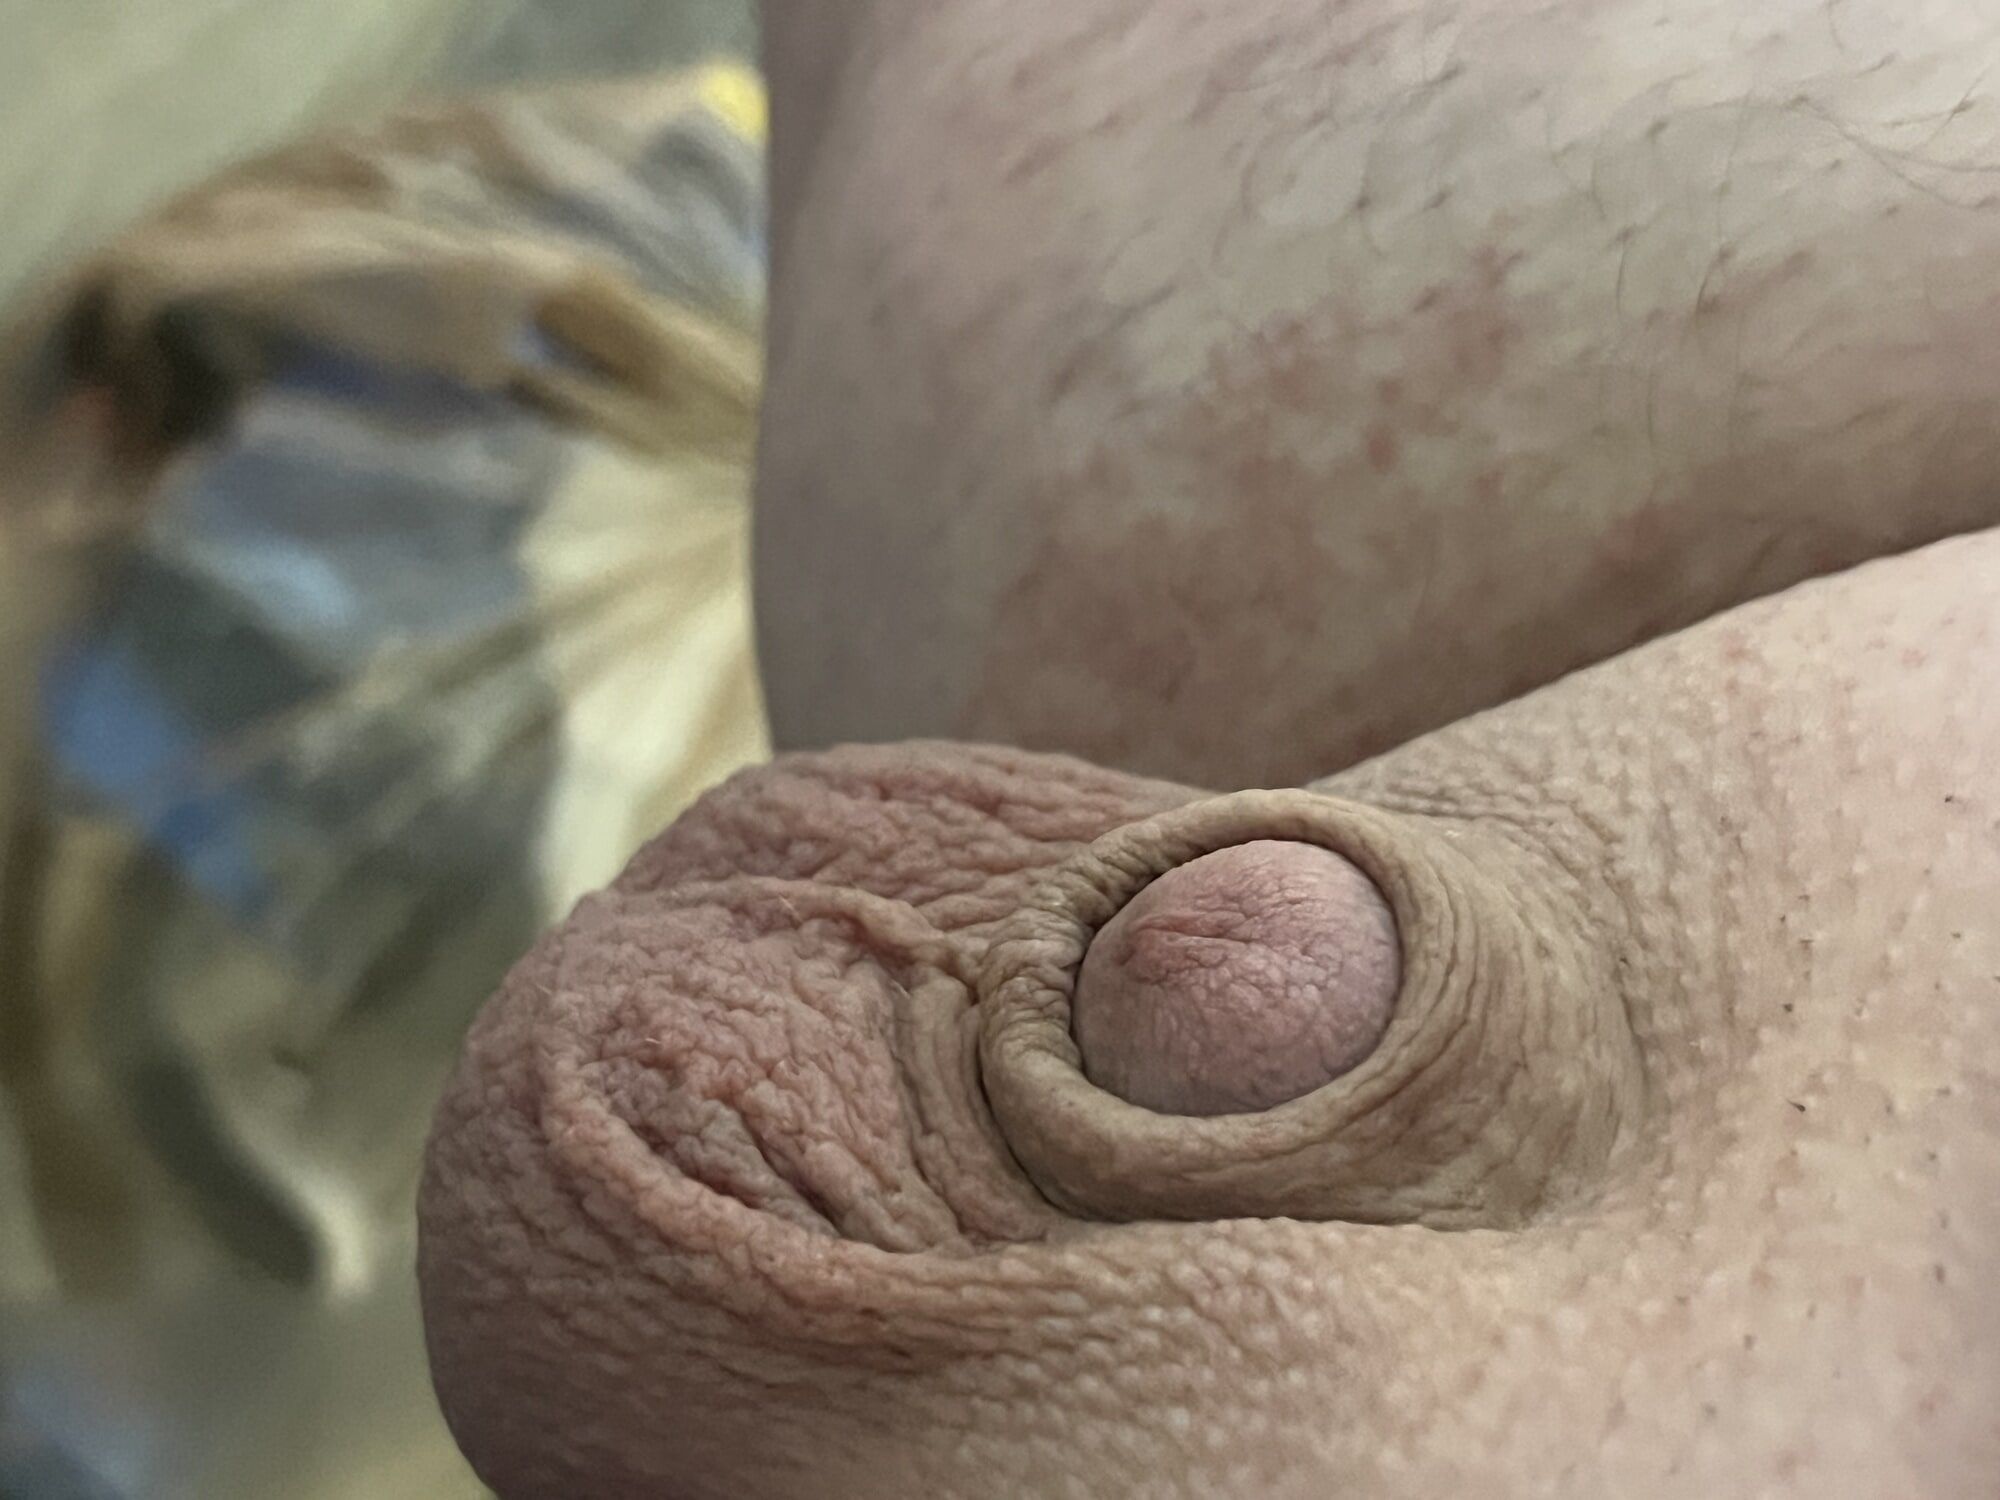 Shaved baby penis